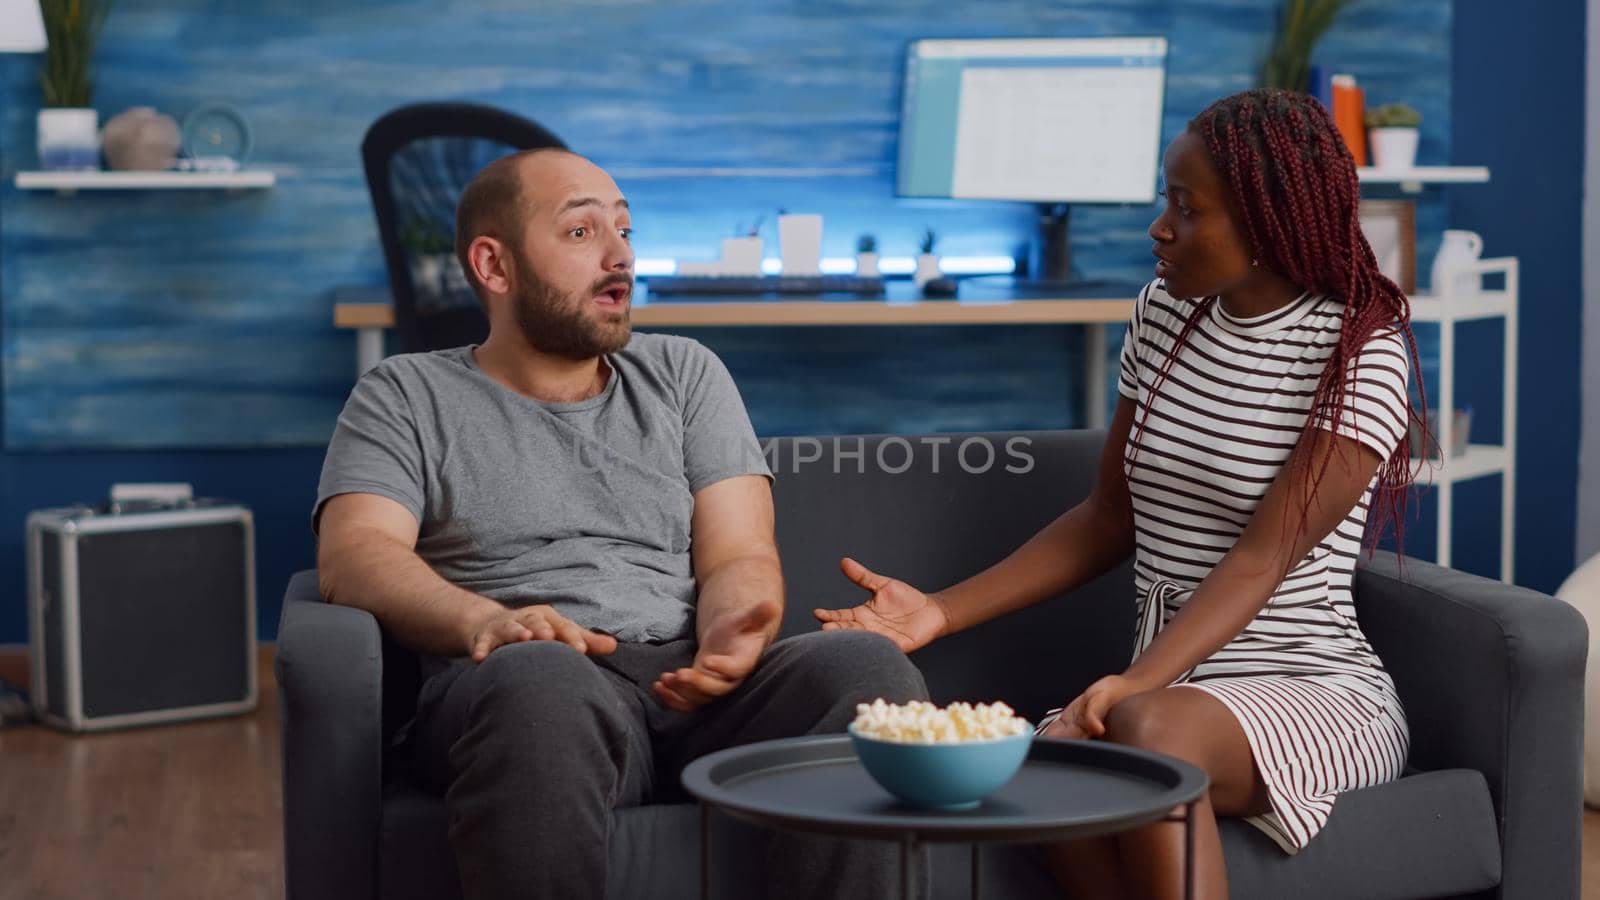 Married interracial people with marriage problems yelling at each other in living room. Mixed race young couple fighting at home while sitting on sofa, having argument and being irritated